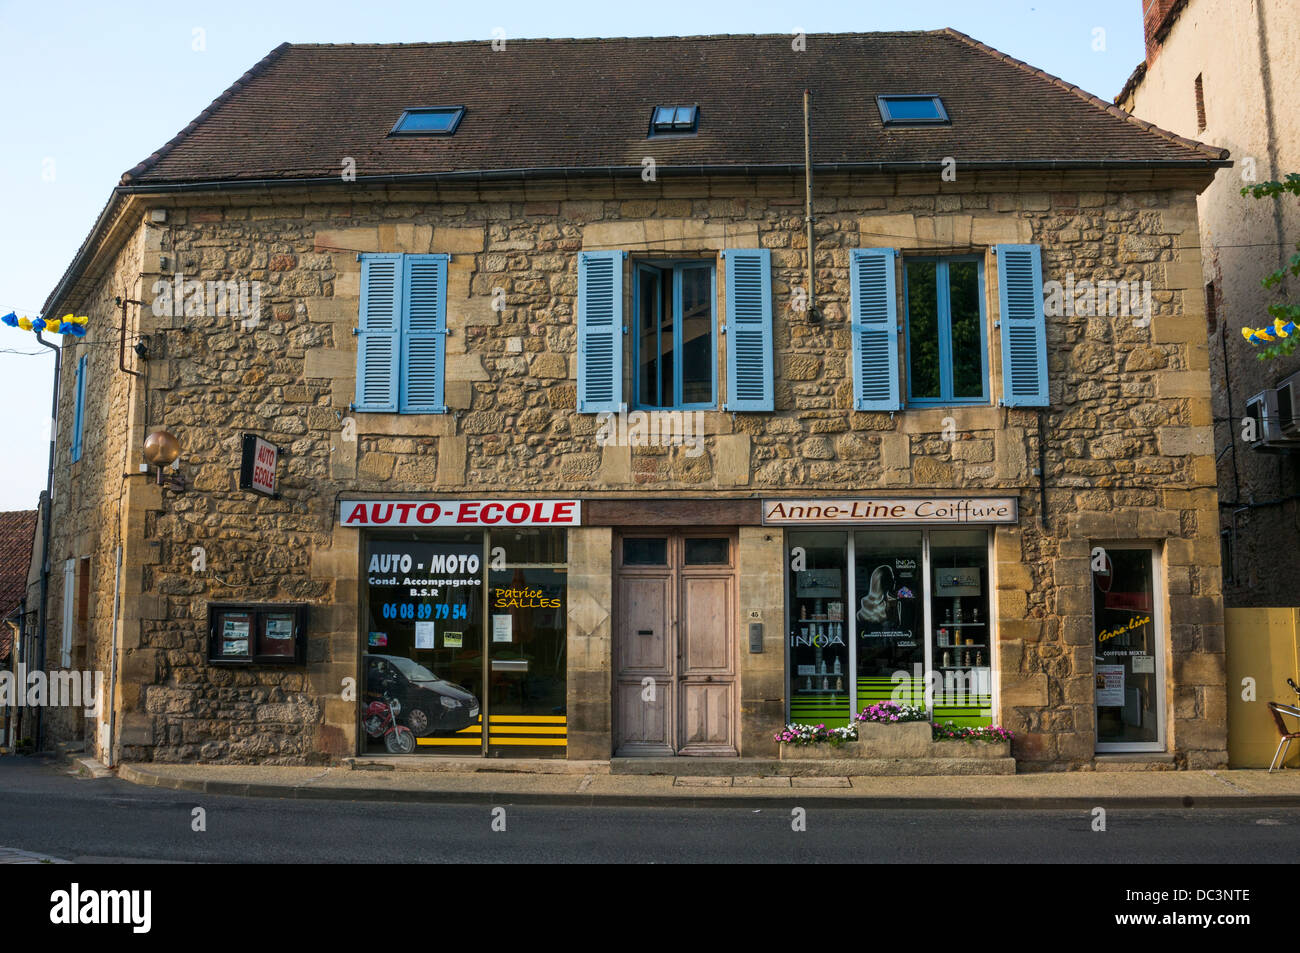 A shared driving school and hairdresser, traditional building in Saint-Cyprien, in the Dordogne, Aquitaine, south west France. Stock Photo